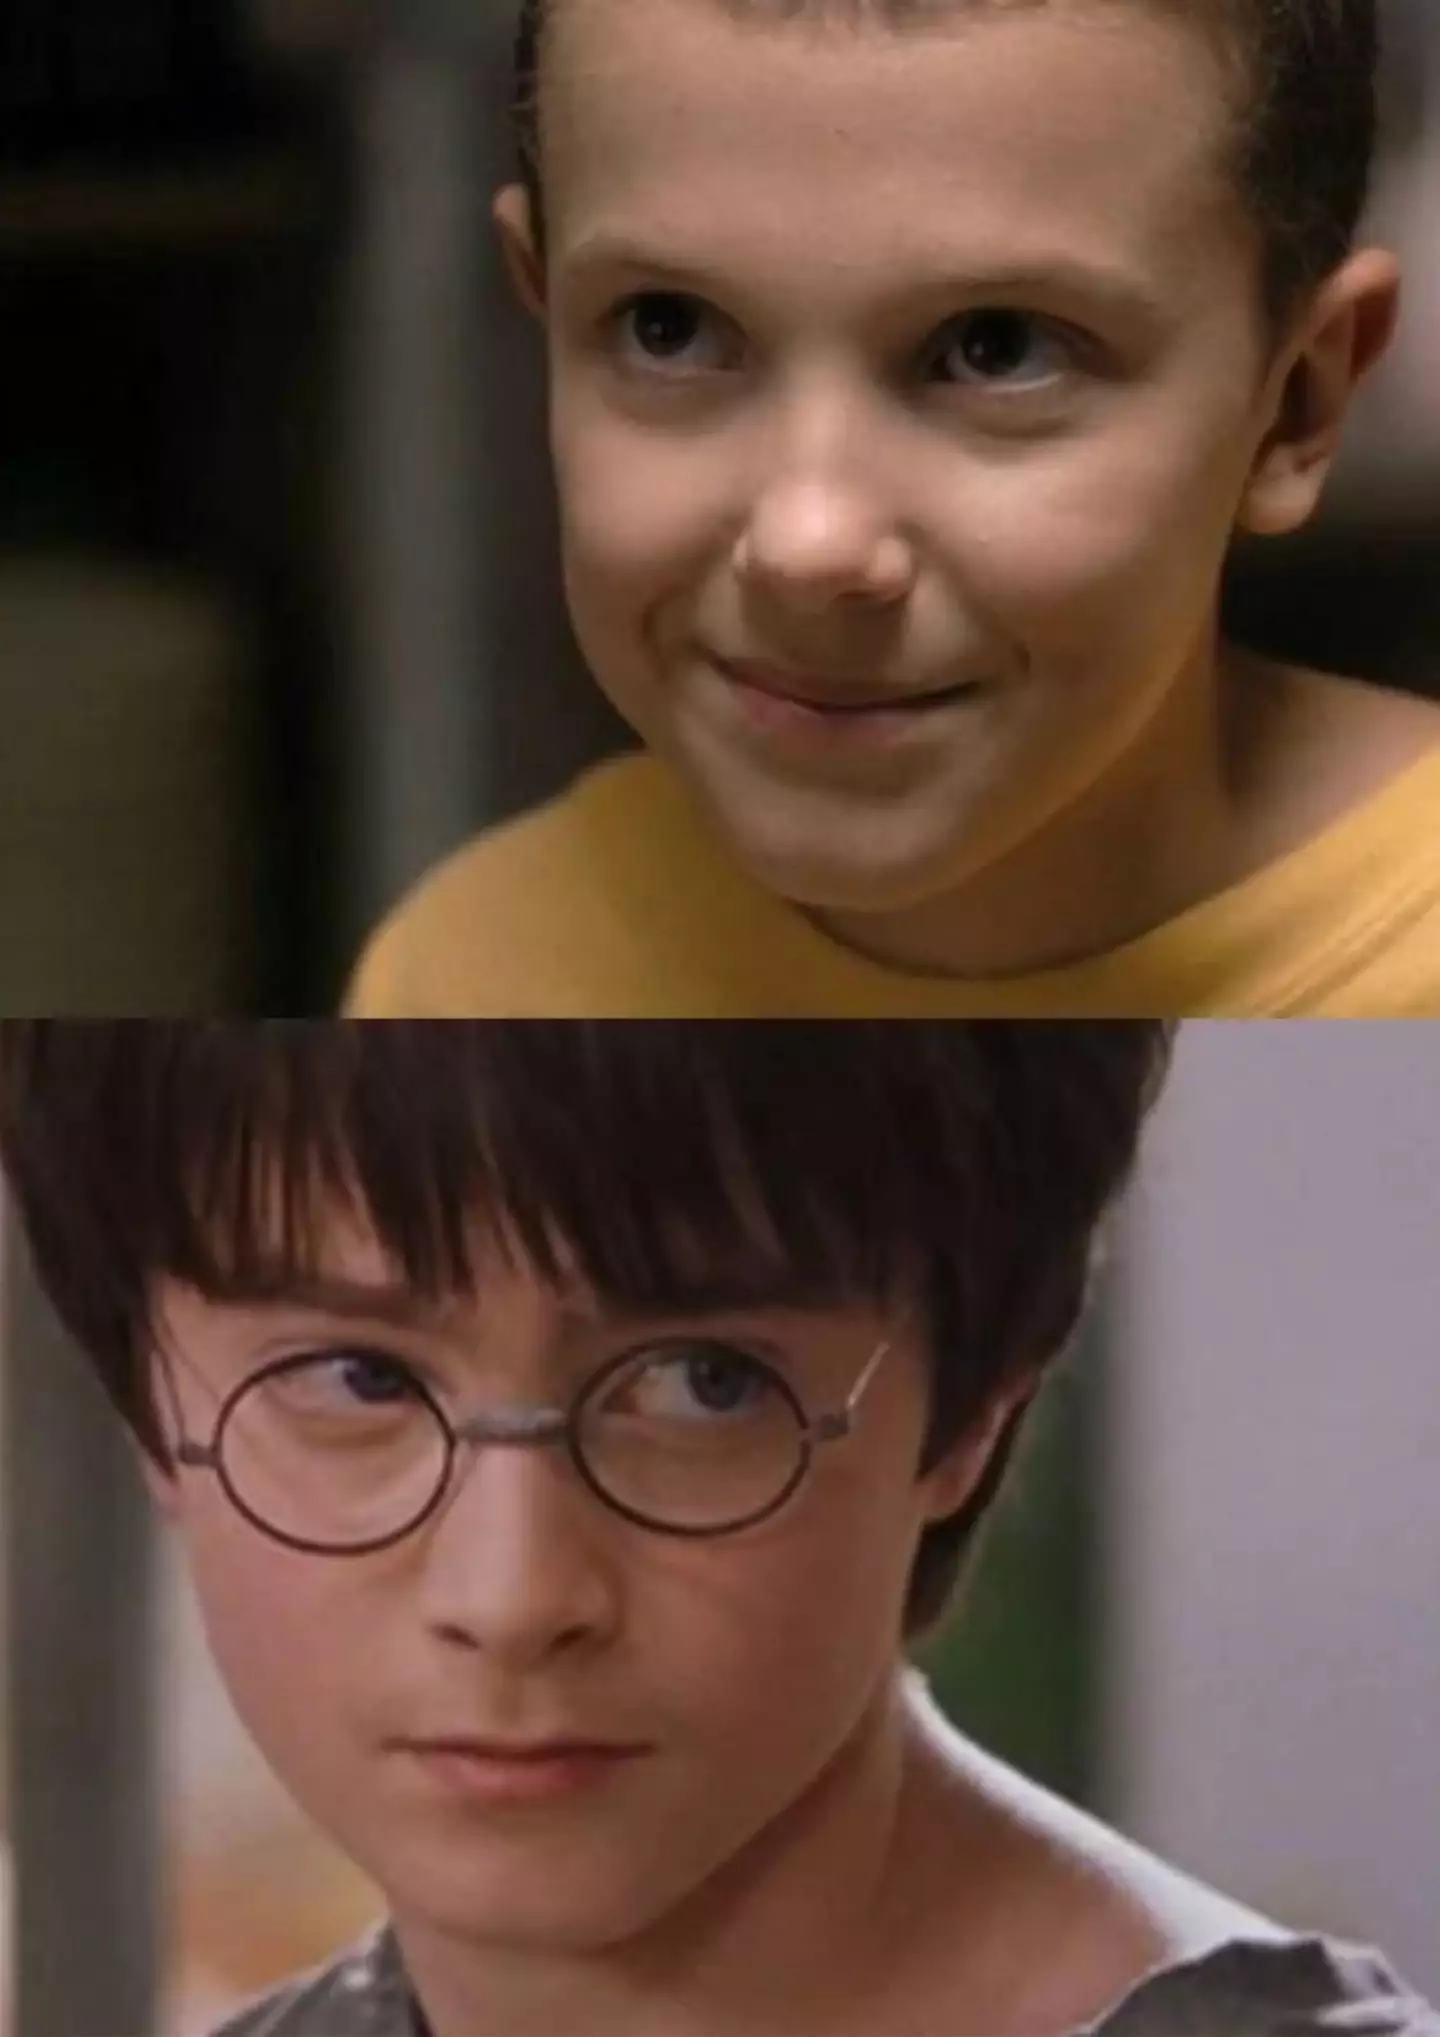 Harry Potter and Eleven both play into the classic 'chosen one' archetype. (